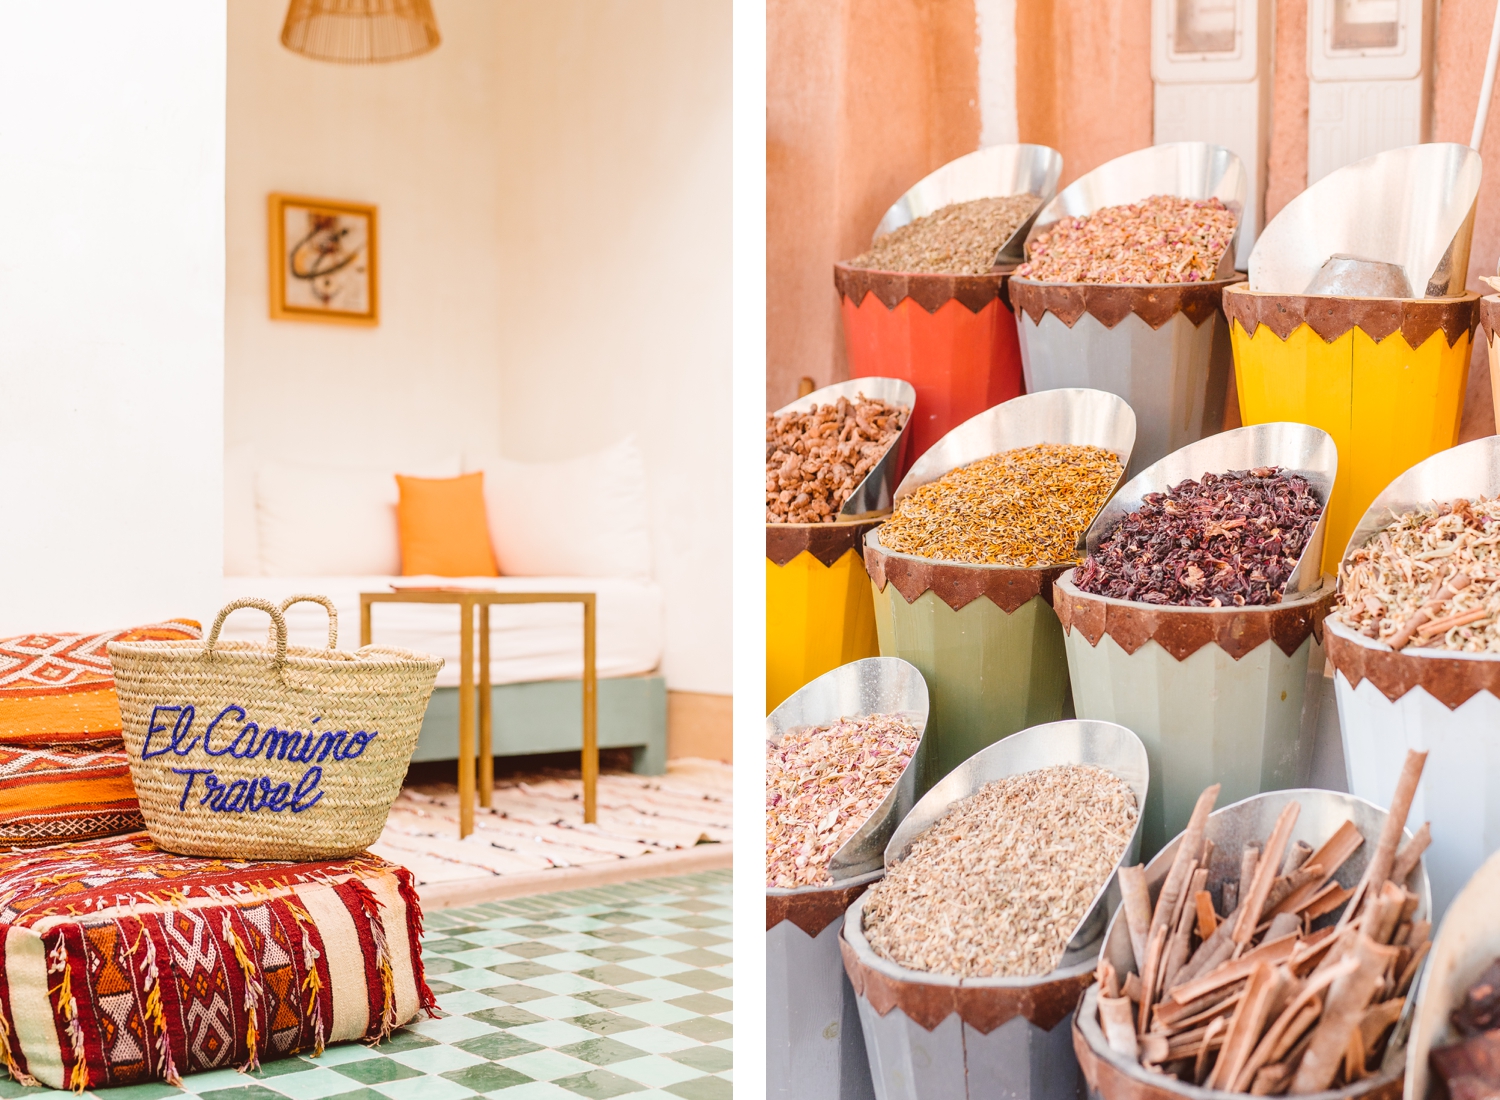 Straw bag that says El Camino Travel sitting on Moroccan poof | colorful containers of spices in Moroccan open air market | Brooke Michelle Photography